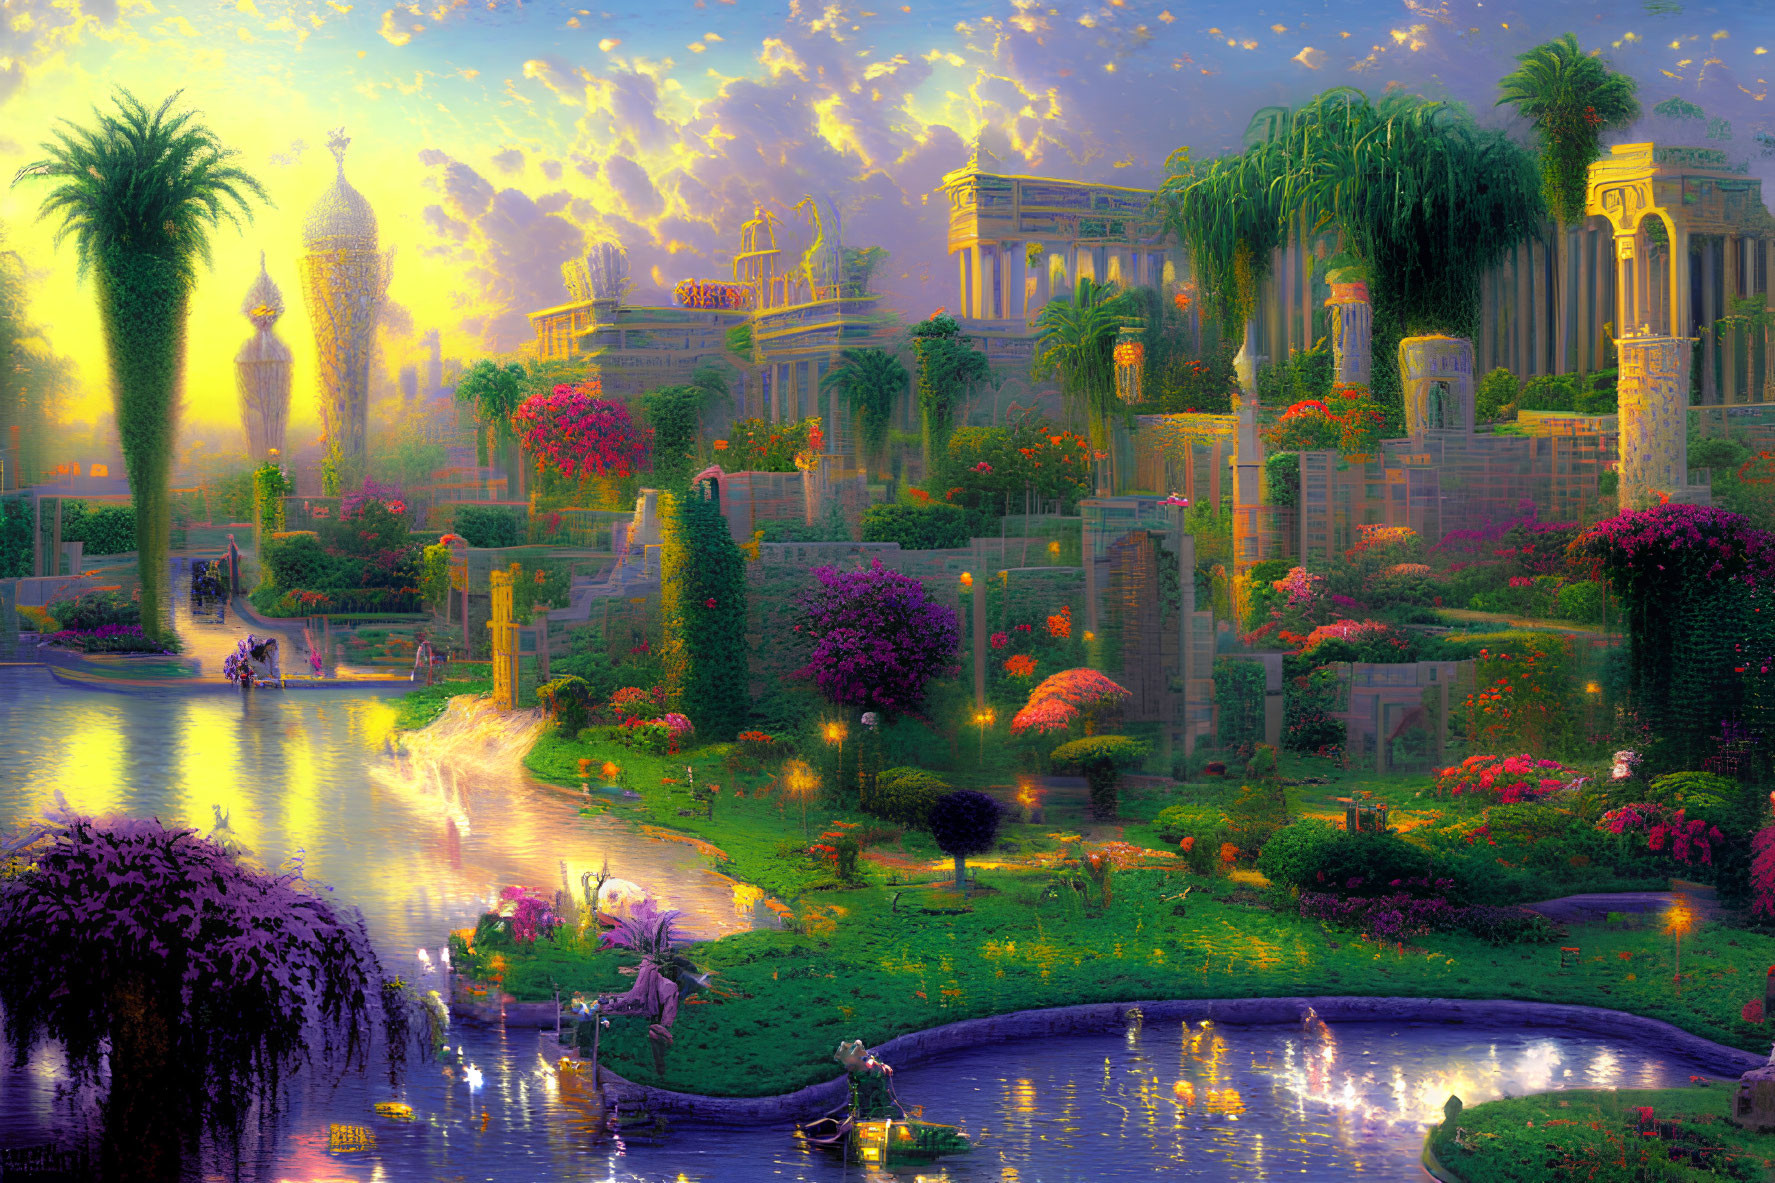 Fantastical landscape with lush gardens, rivers, and ornate structures